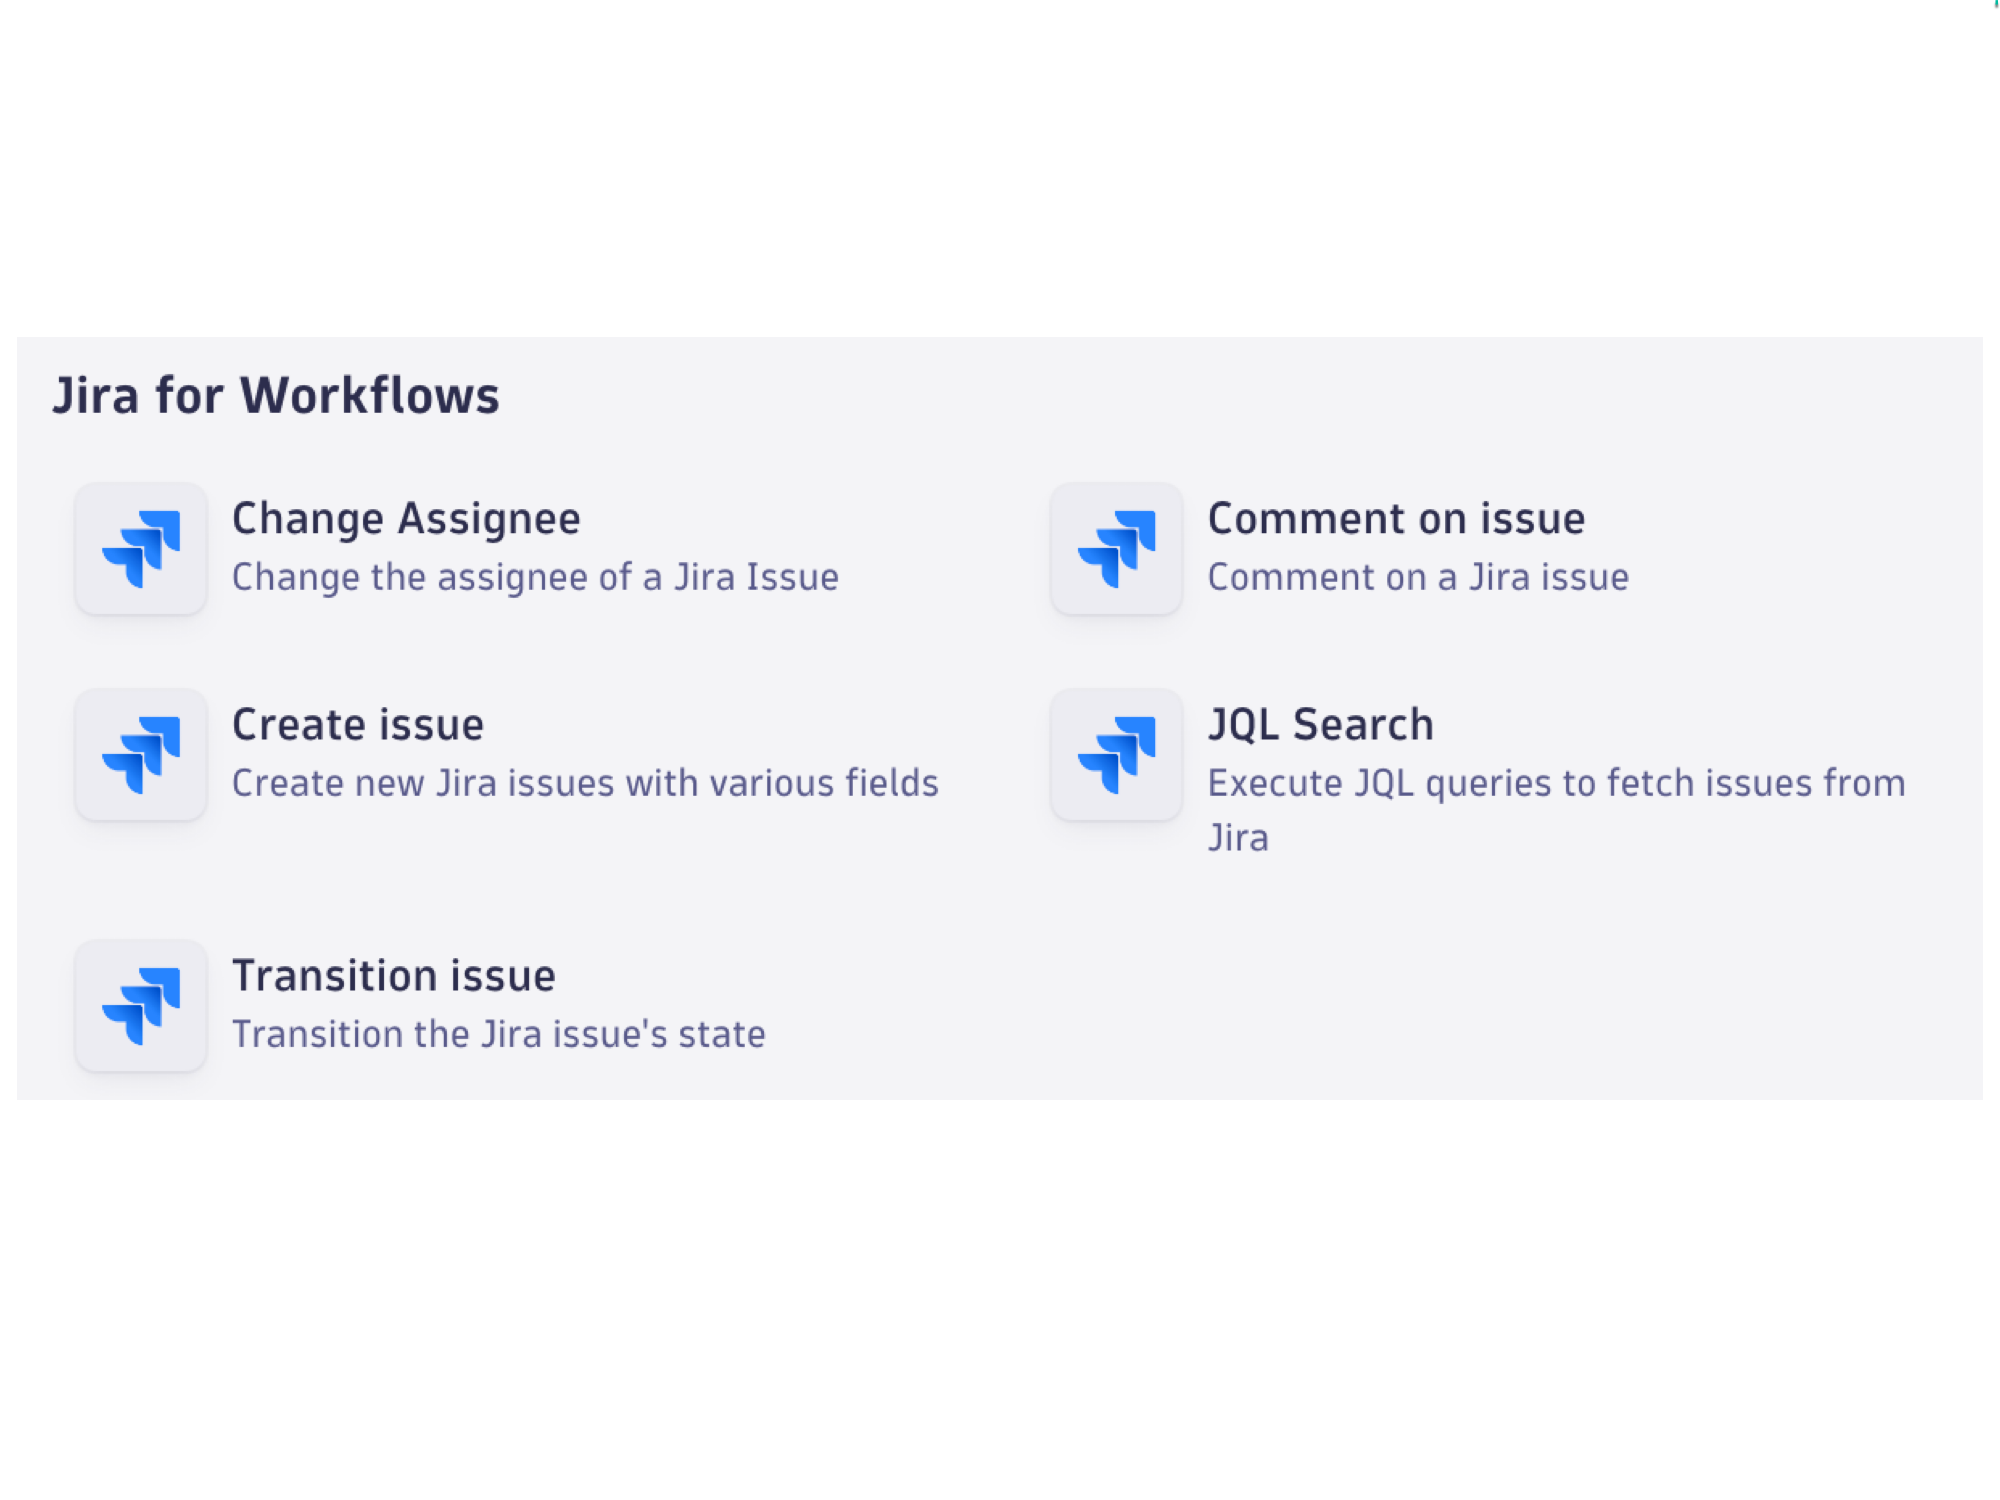 Available Jira actions: create a Jira ticket, comment on an issue, change assignee, transition or resolve an issue, retrieve additional information via JQL.